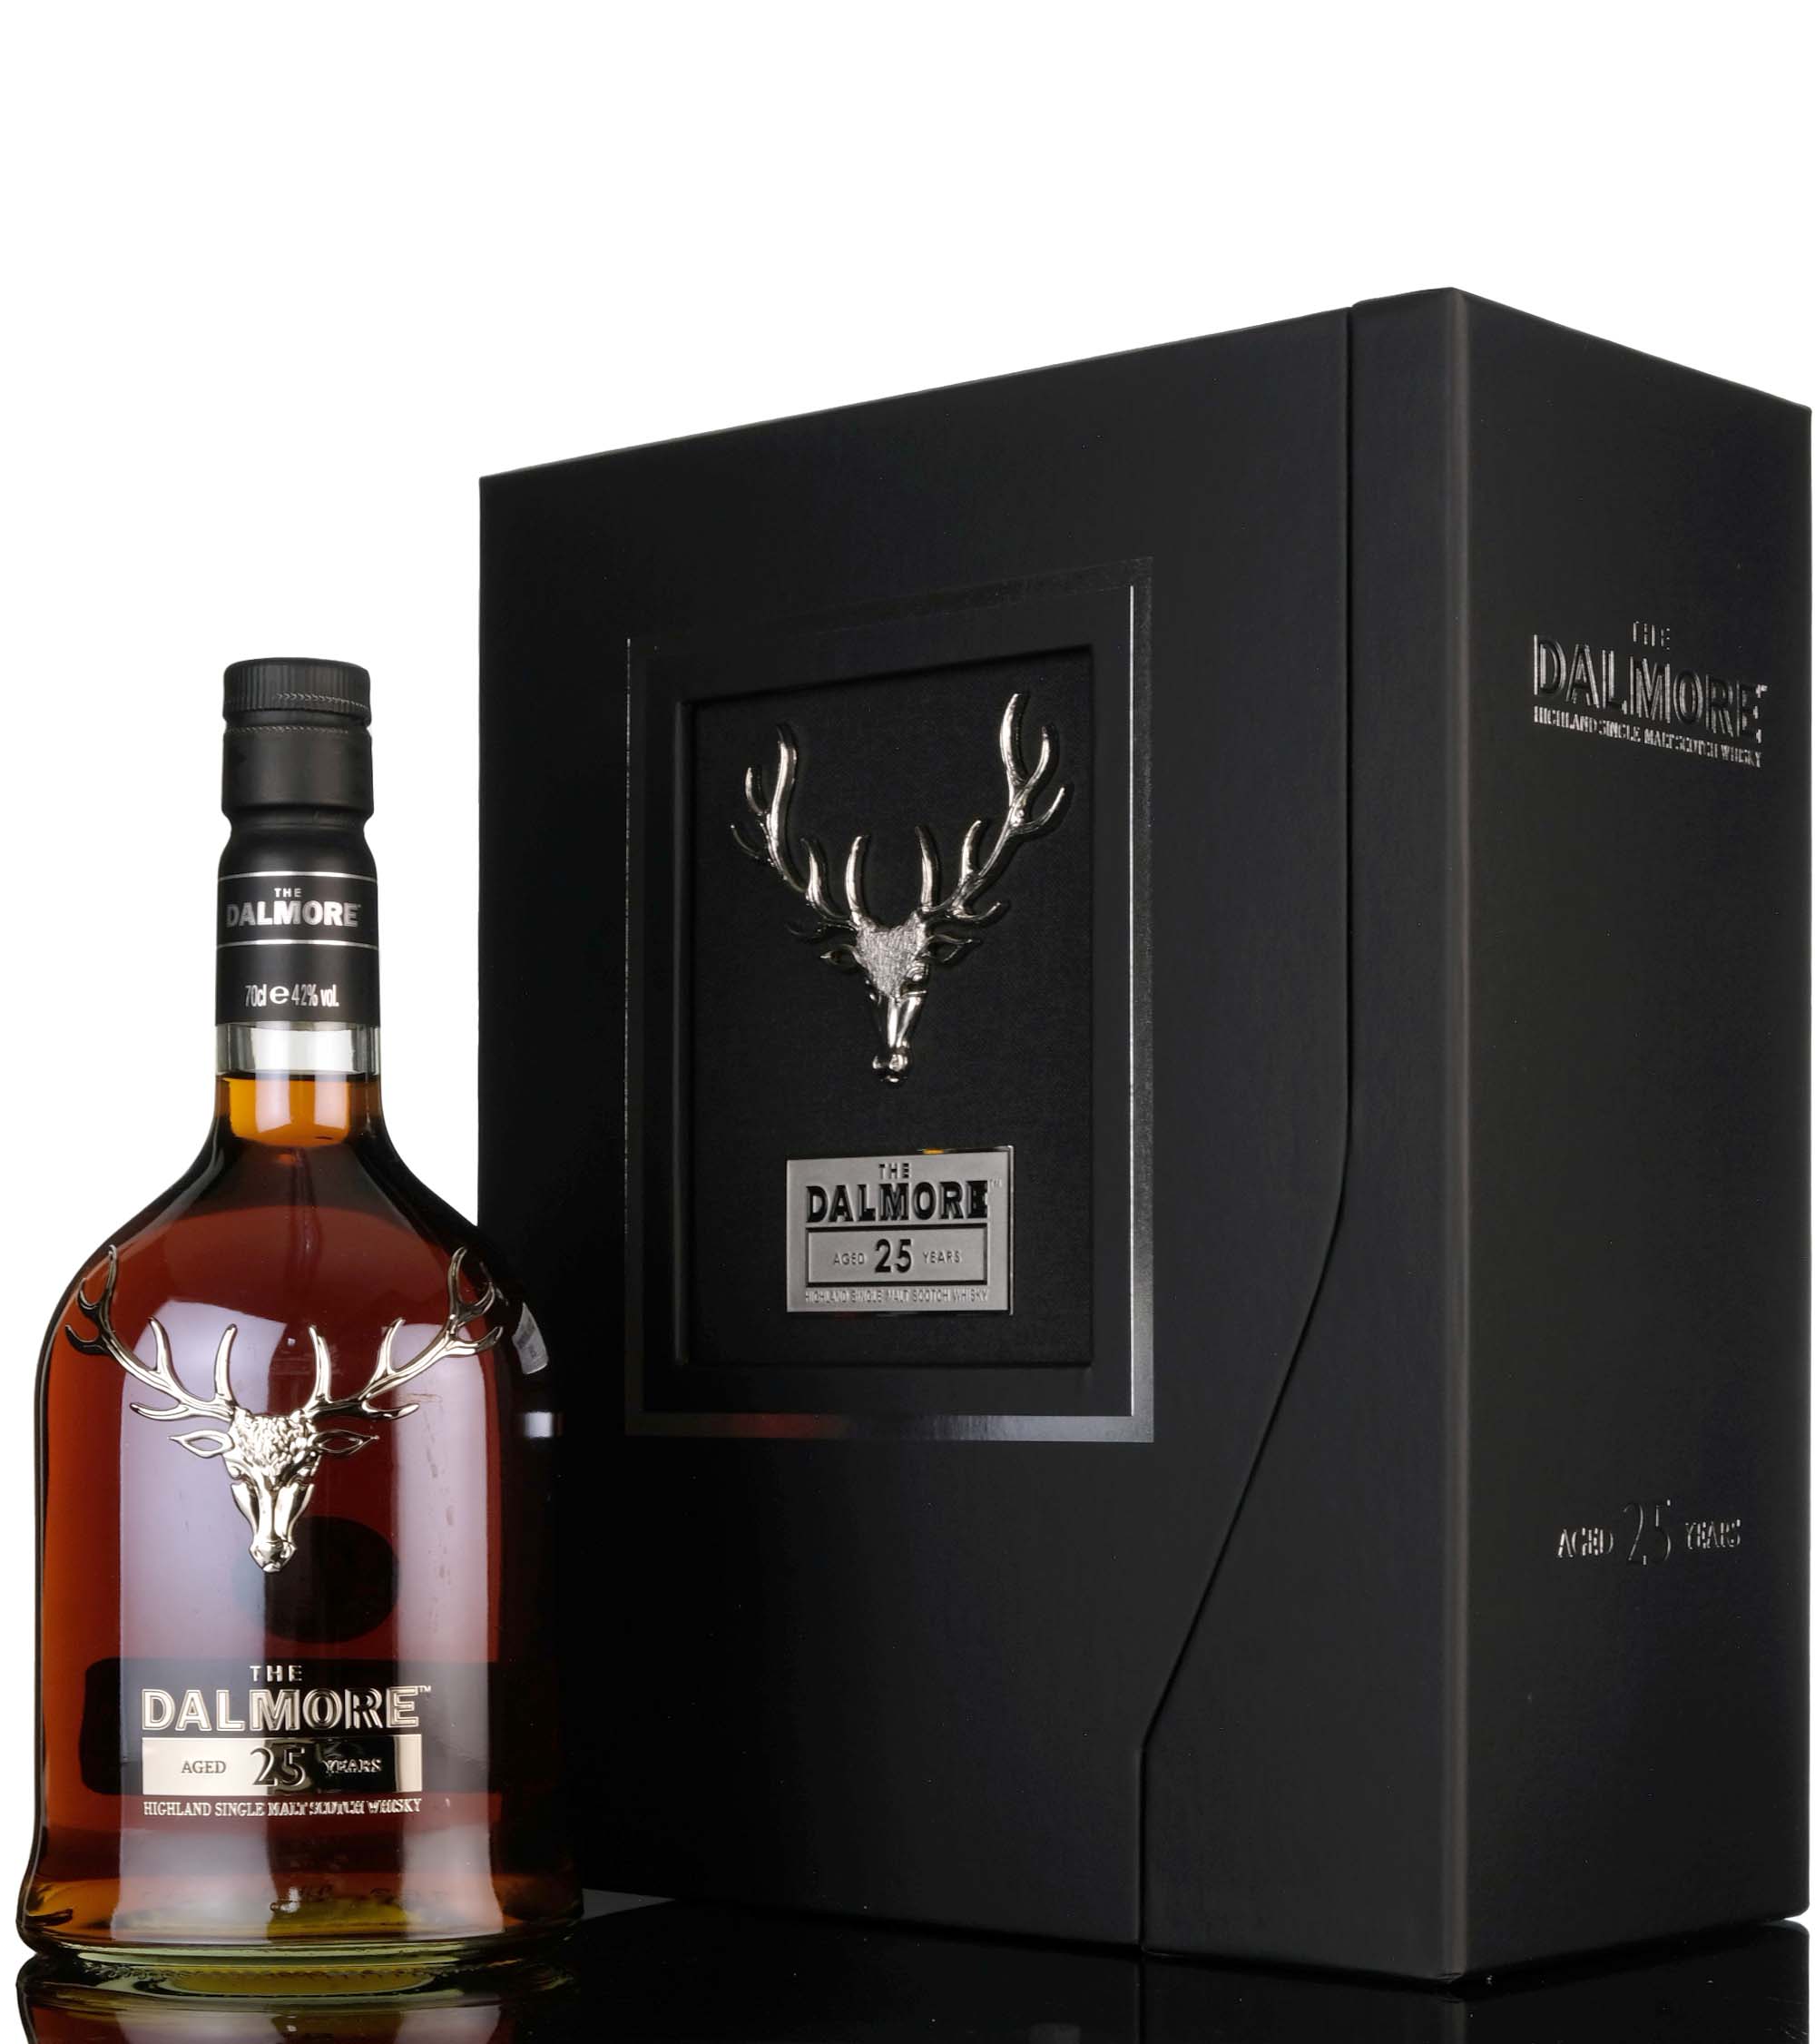 Dalmore 25 Year Old - 2013 Release